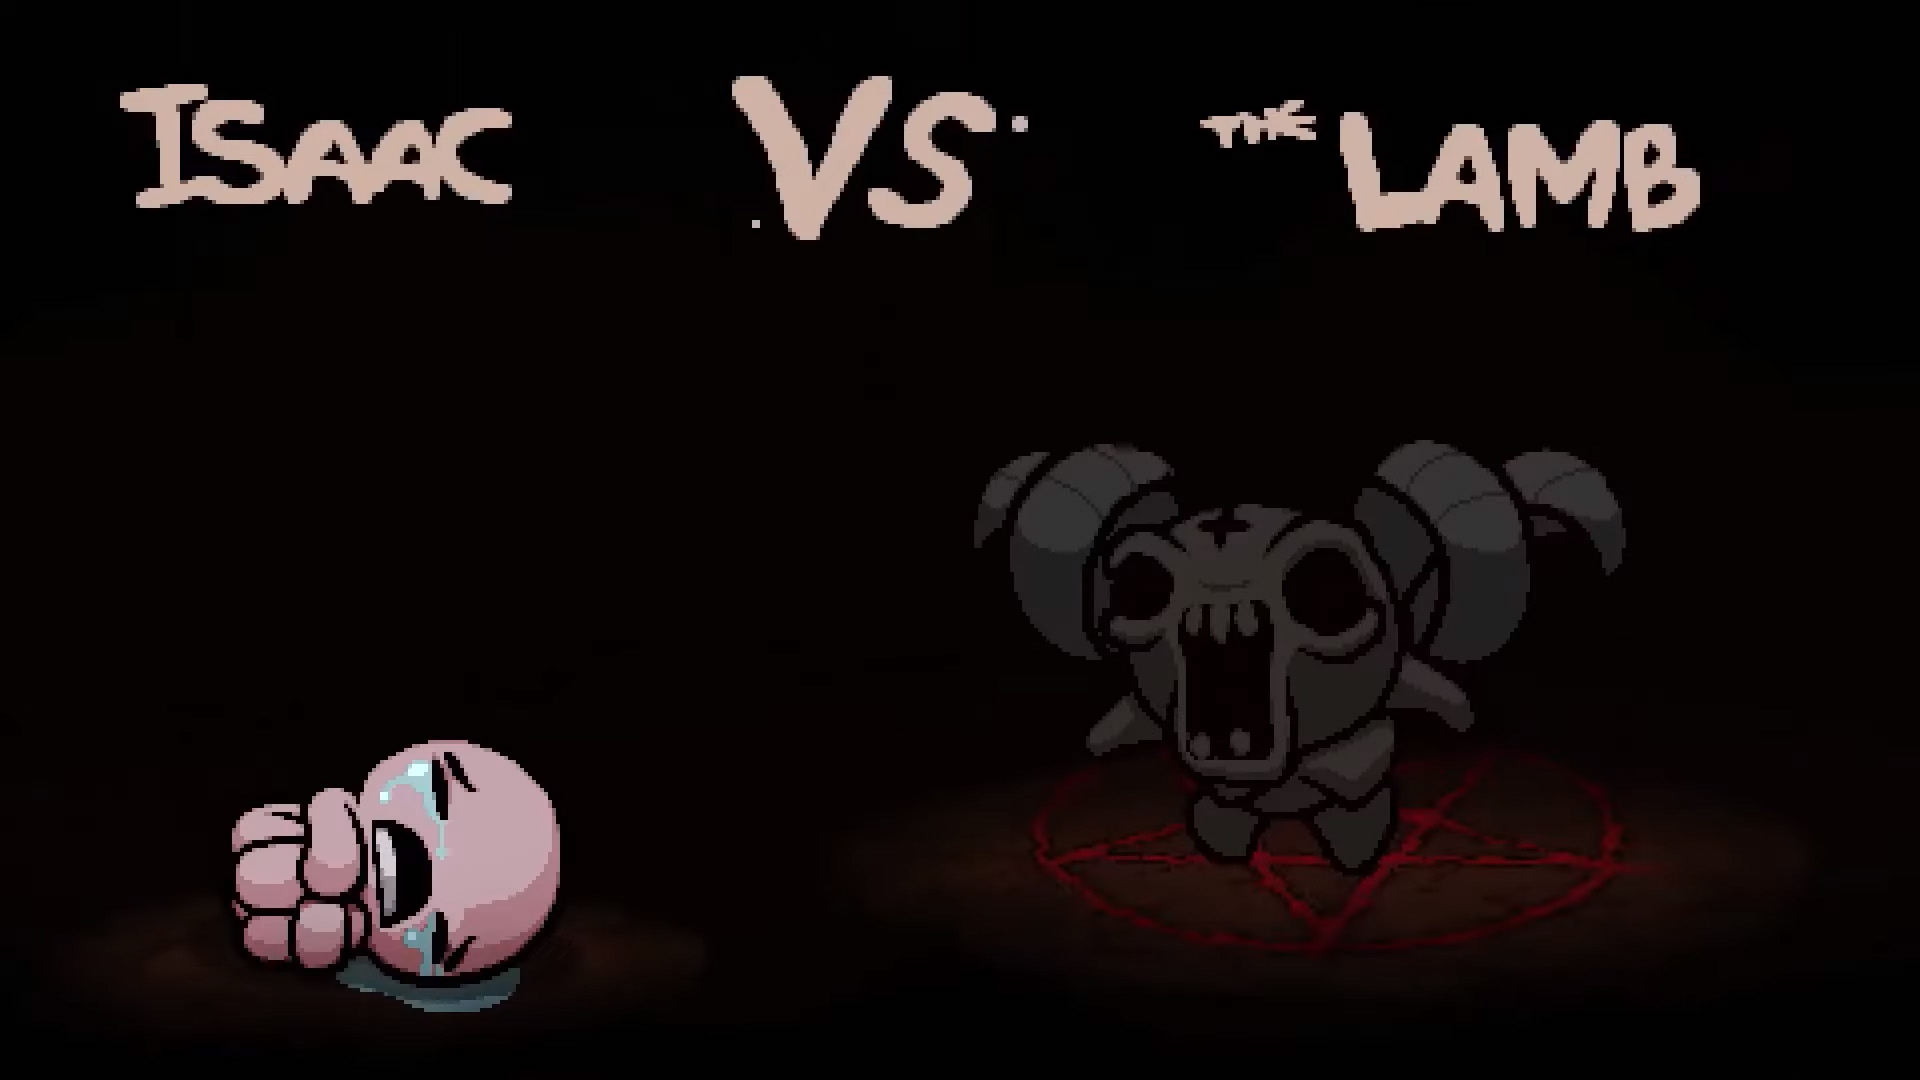 binding of isaac rebirth not responding on launch